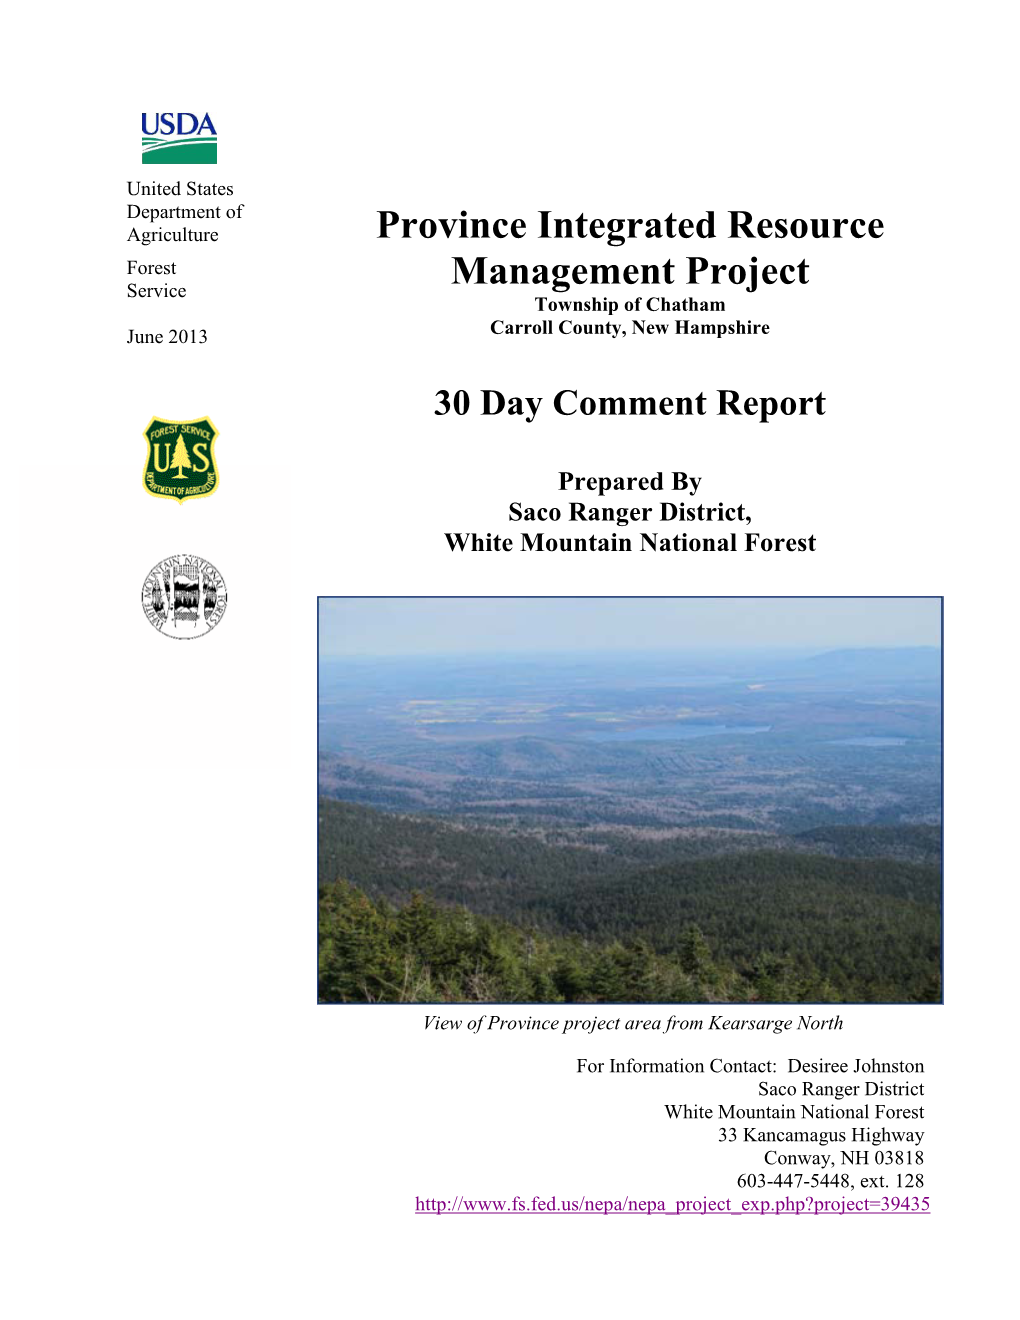 Province Integrated Resource Management Project